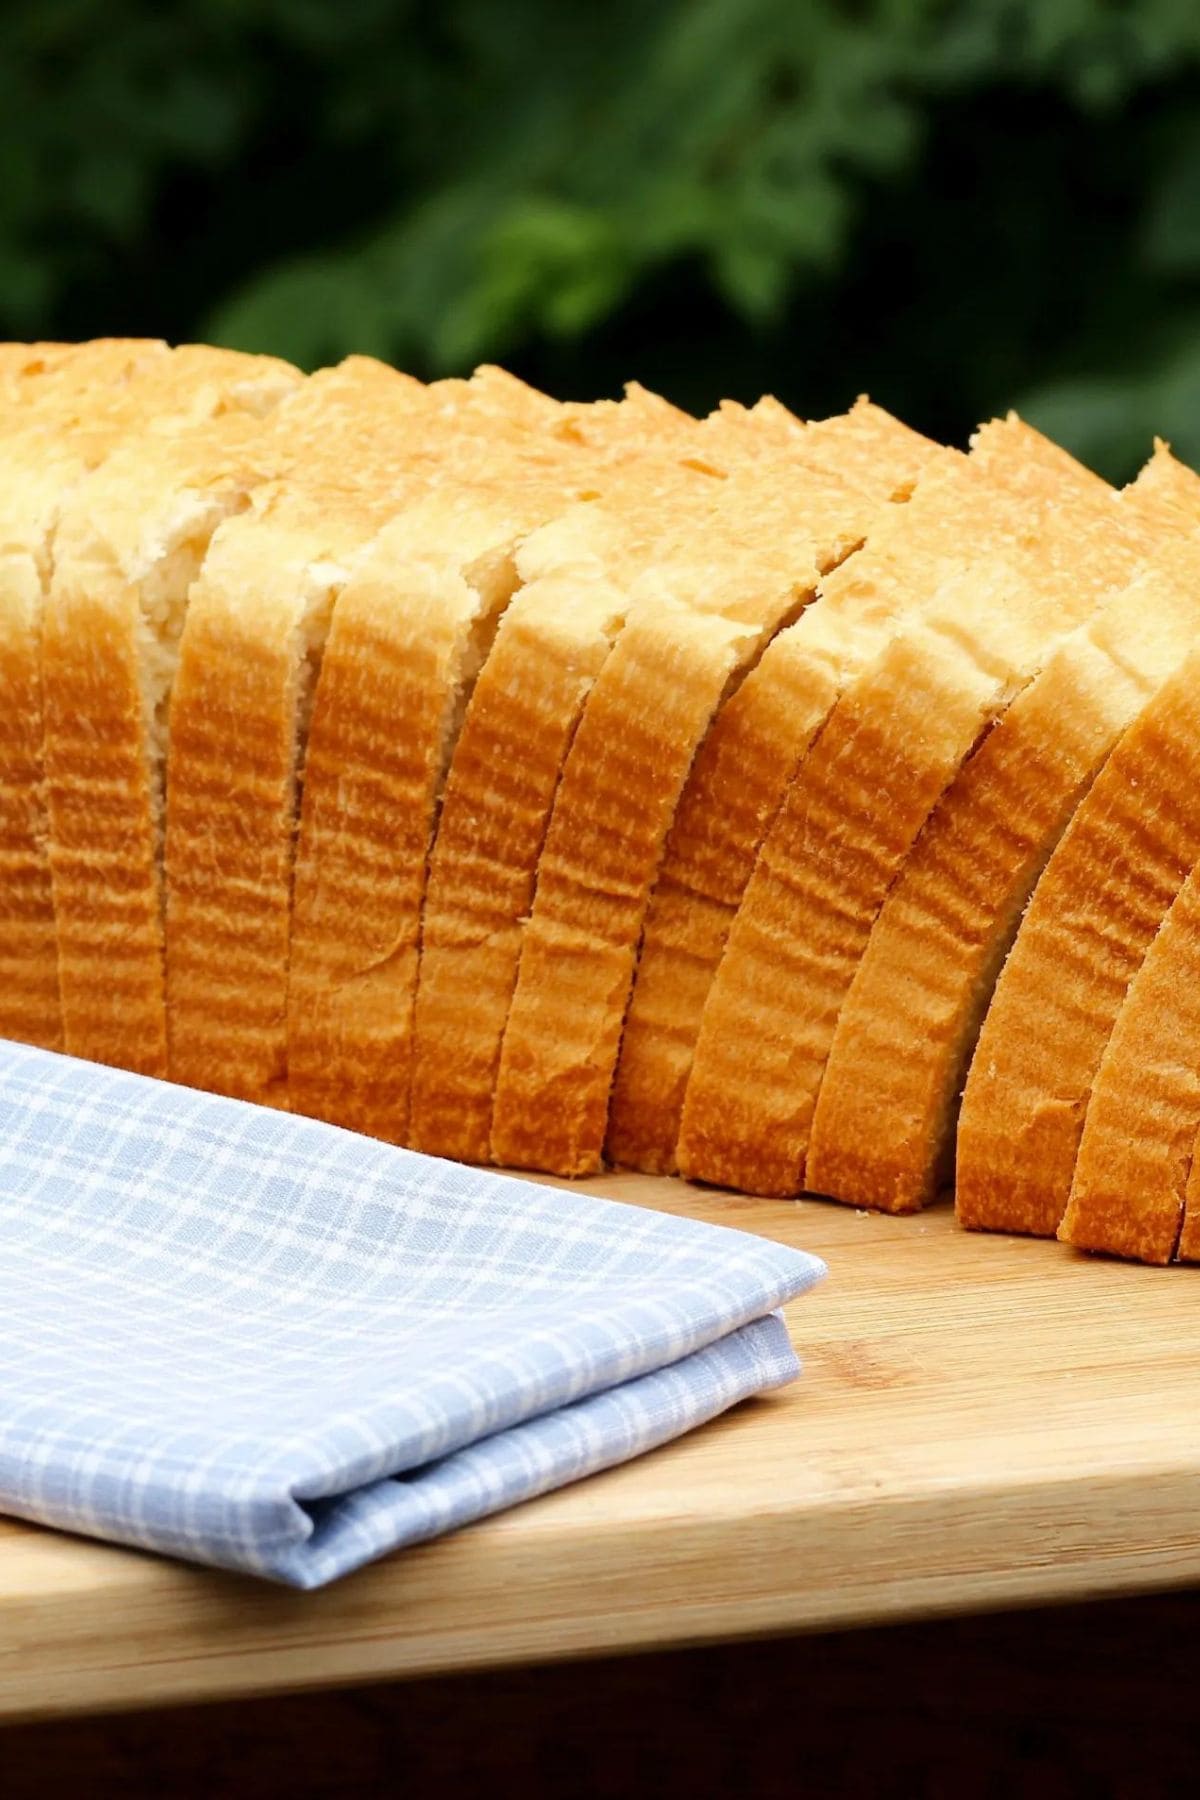 Large loaf of bread sliced into slices with a folded blue linen napkin.